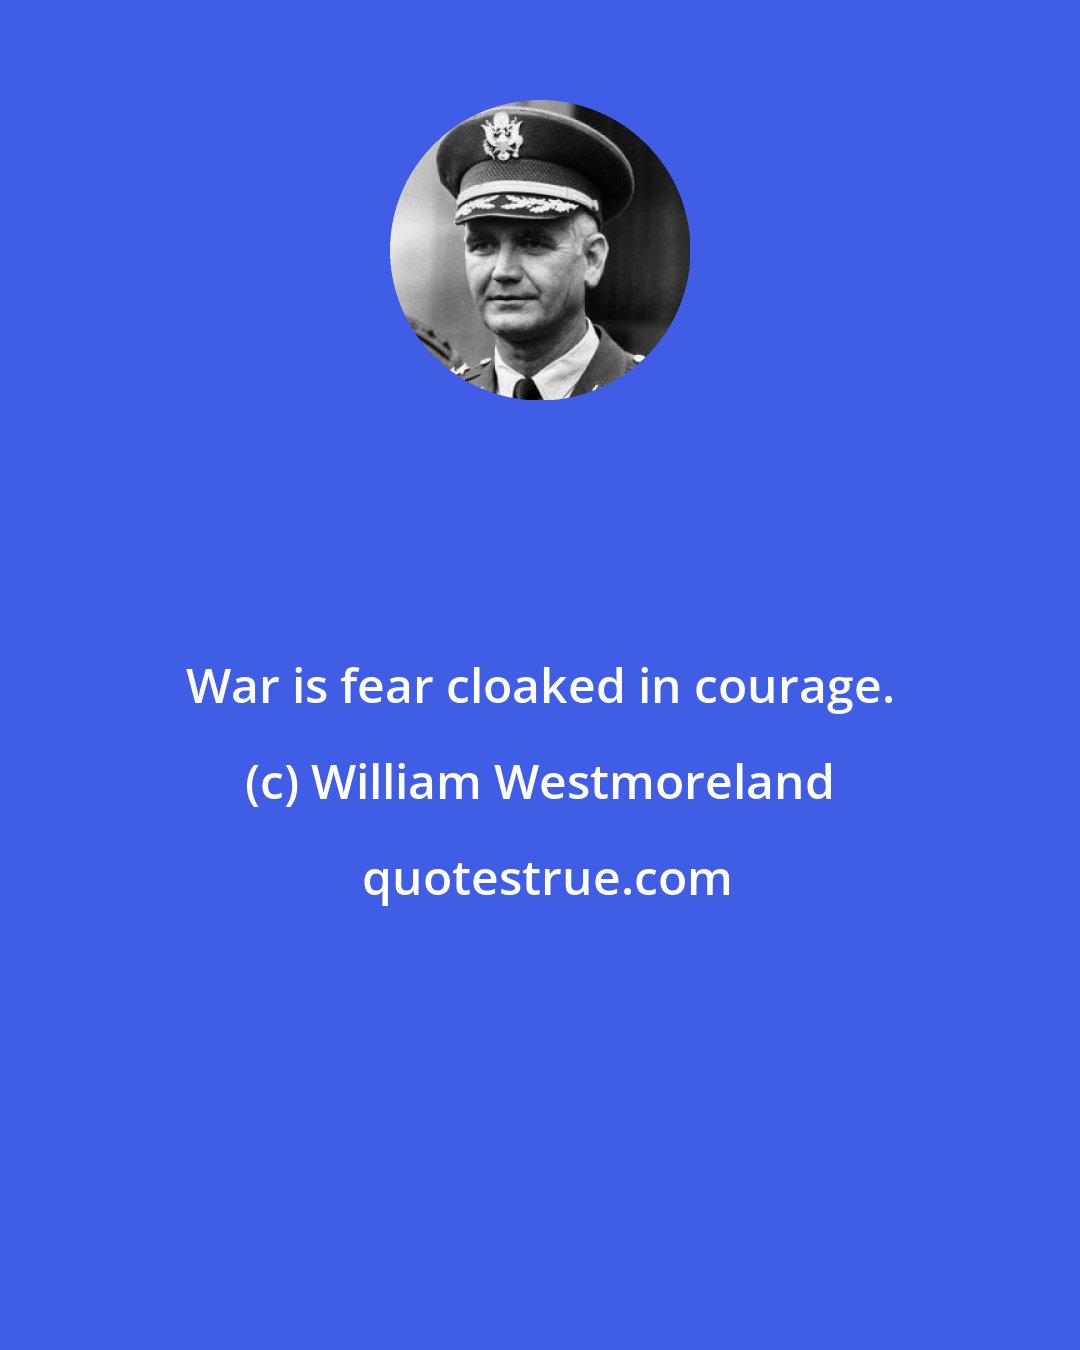 William Westmoreland: War is fear cloaked in courage.